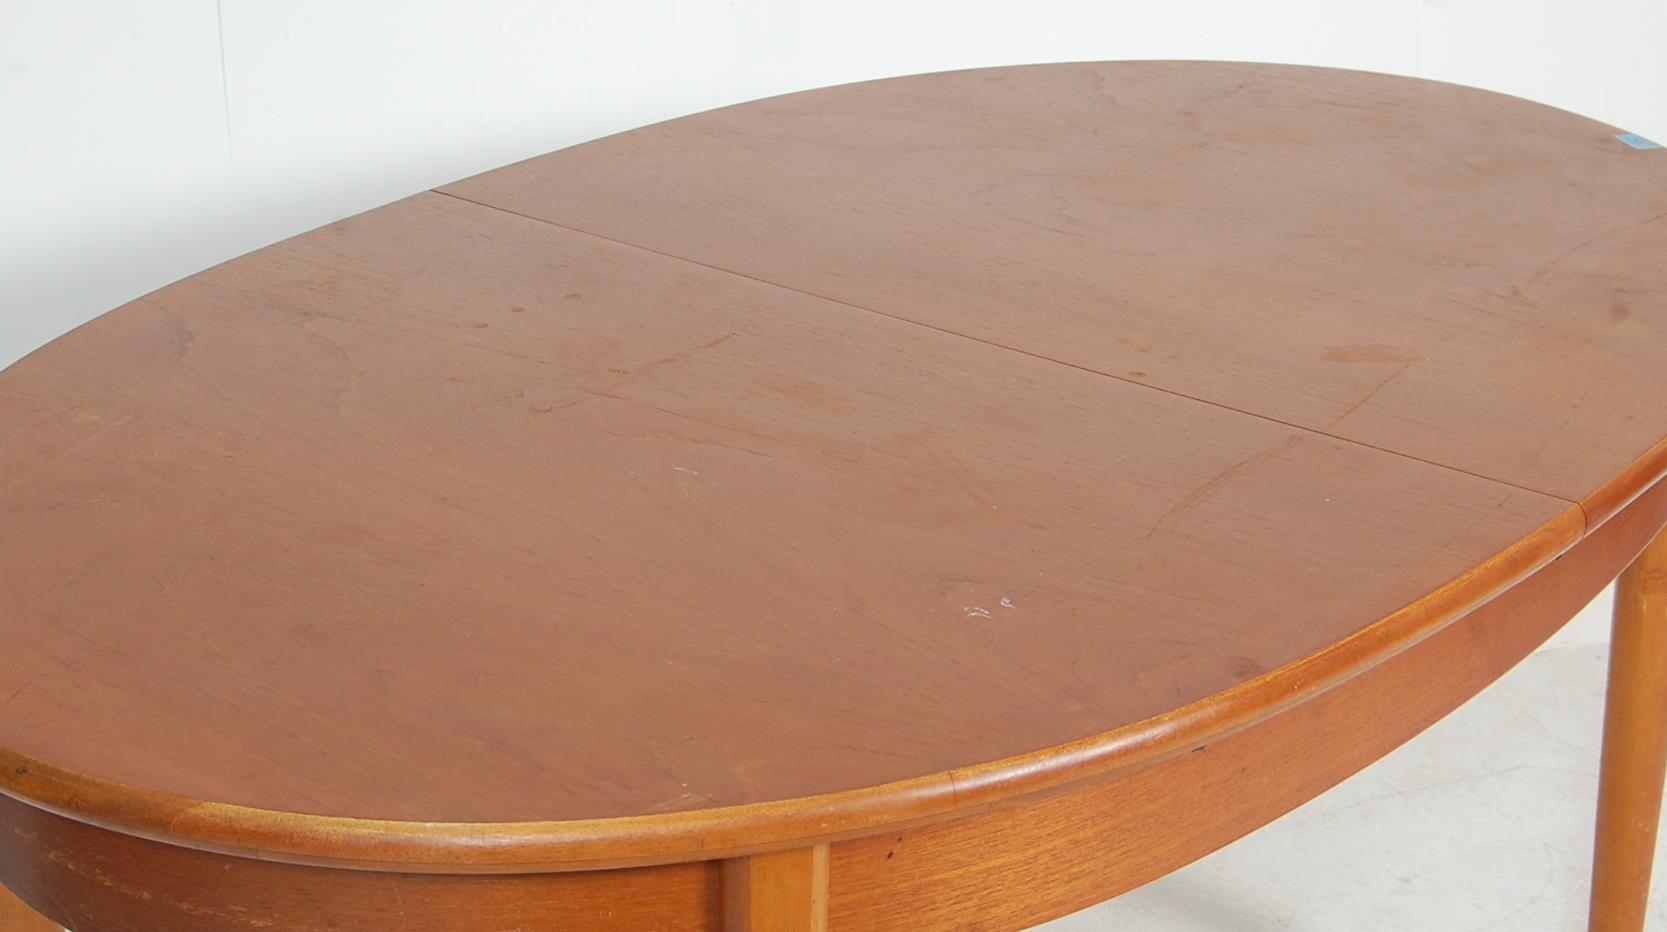 RETRO VINTAGE 1970S EXTENDABLE TEAK DINING TABLE - Image 3 of 6